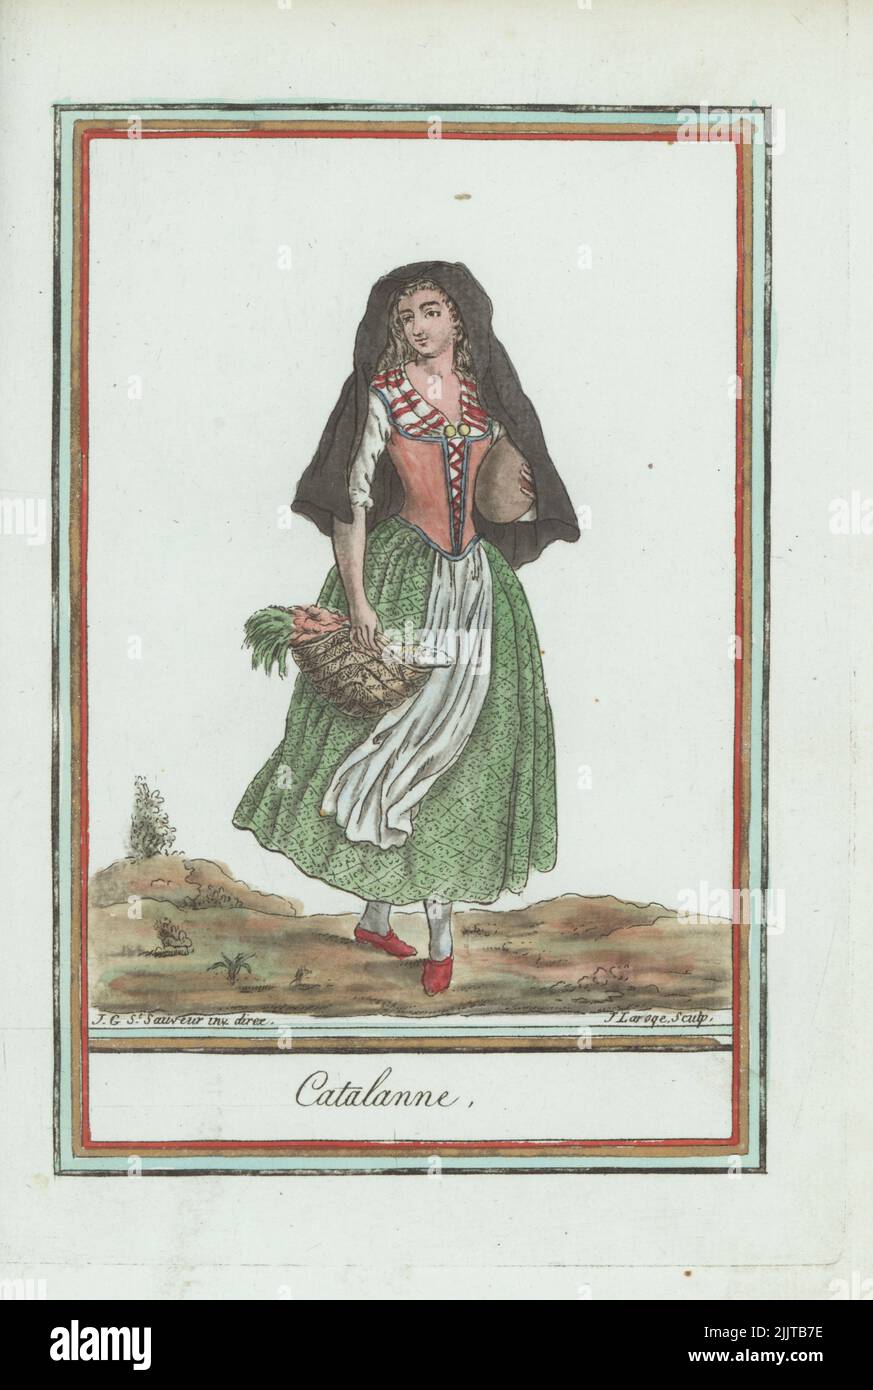 Catalan woman, Catalonia, Spain. In a long black veil, laced corset, kerchief a la francais over the bust, long skirts, apron, shoes, holding a basket of vegetables and fish. Catalanne. Handcoloured copperplate engraving by J. Laroque after a design by Jacques Grasset de Saint-Sauveur from his Encyclopedie des voyages, Encyclopedia of Voyages, Bordeaux, France, 1792. Stock Photo